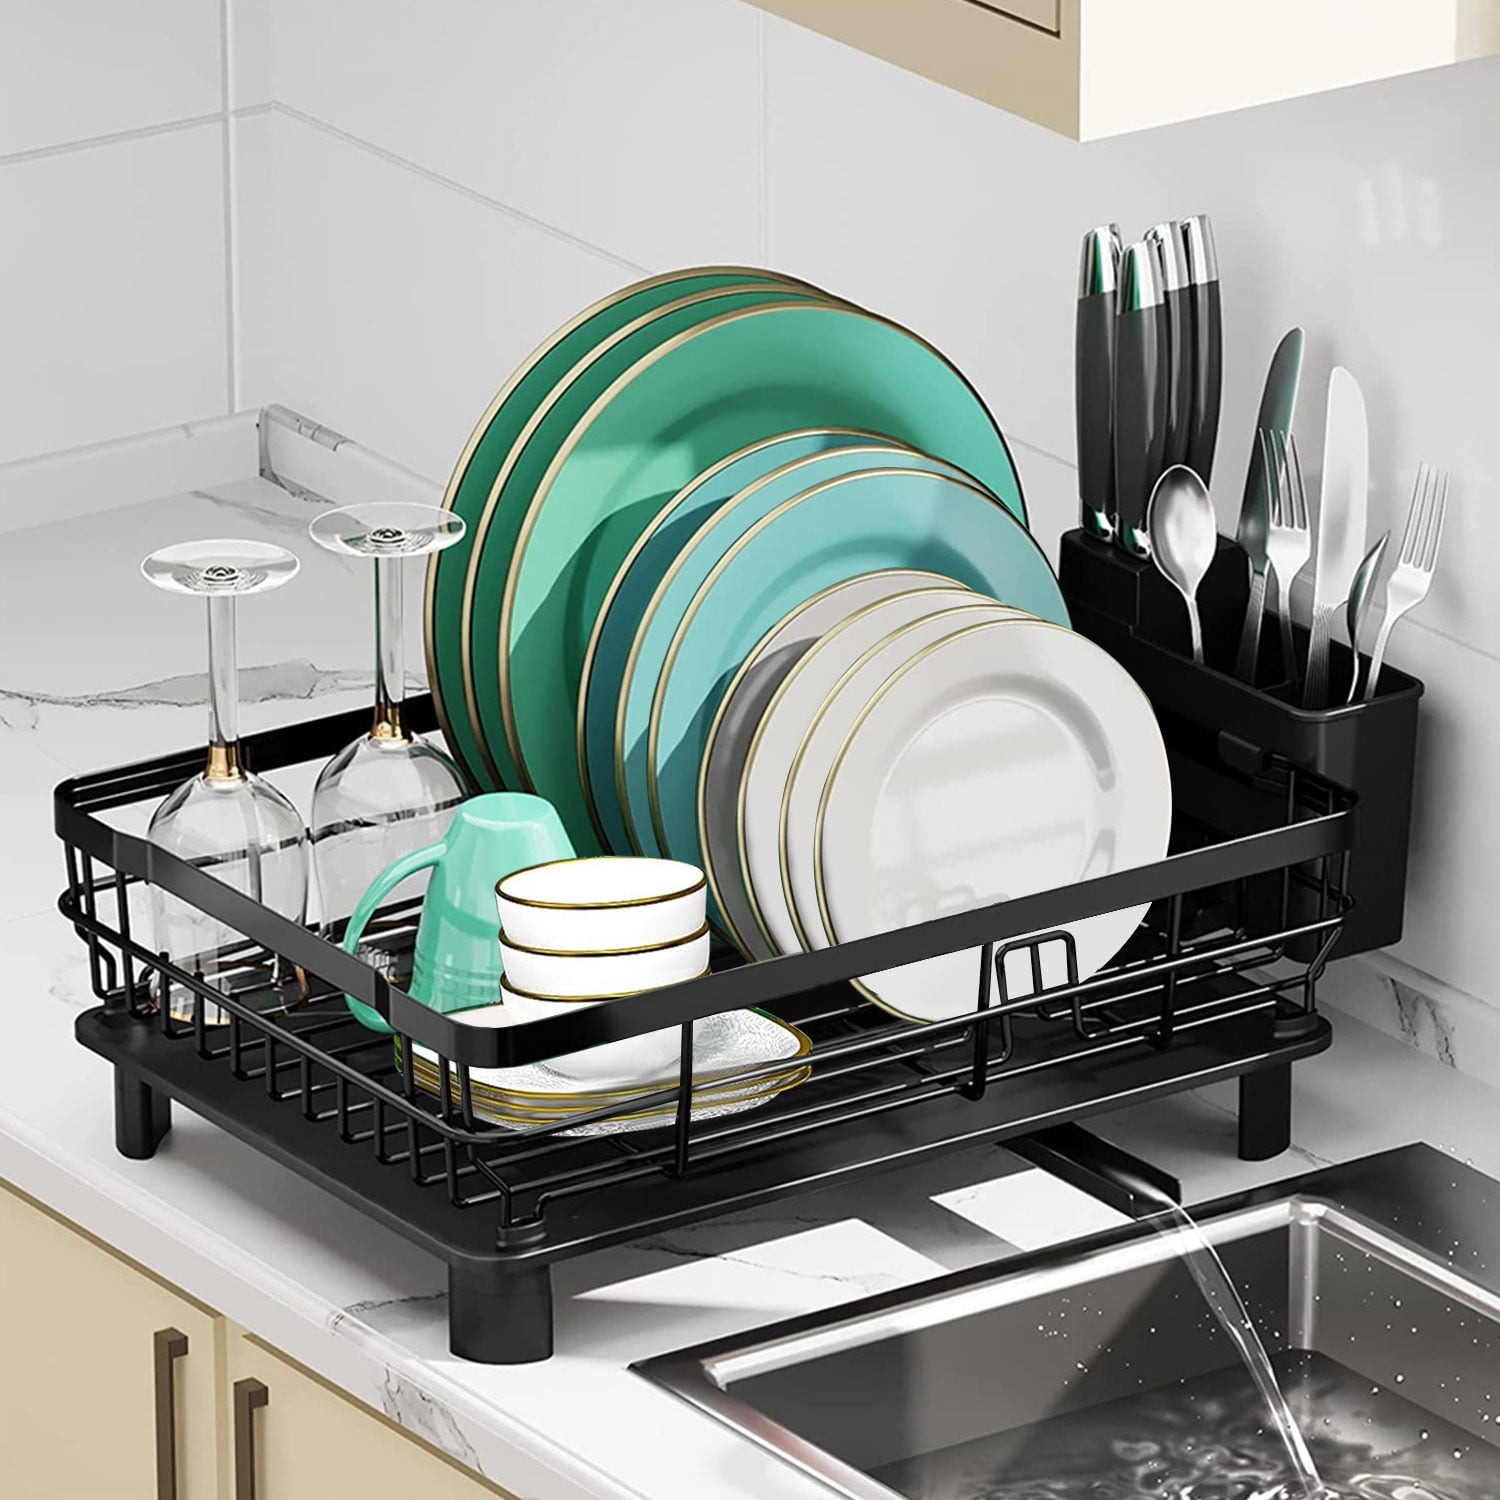 Ewaiira Dish Drying Rack, Dish Racks for Kitchen Counter, Anti-Rust Dish  Dryer Rack with 360° Swivel Spout Drainboard Set, Utensil Holder and Cup